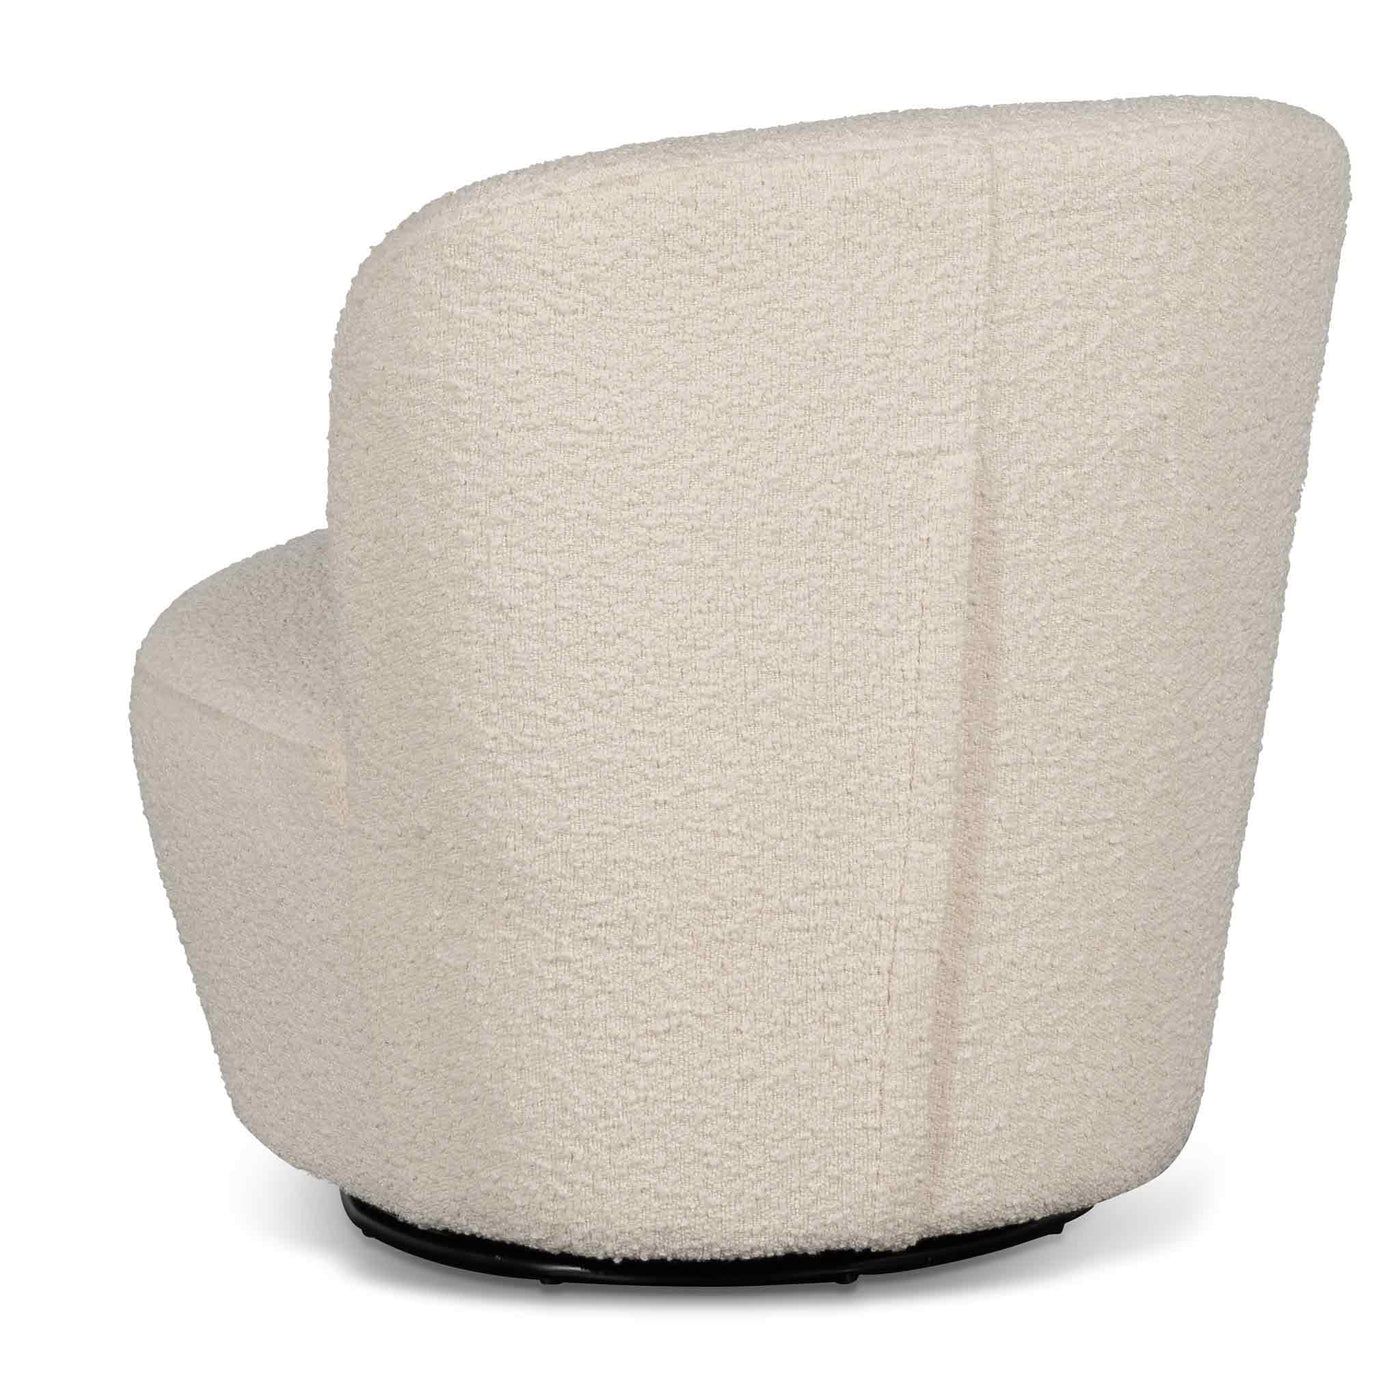 Swivel Lounge Chair - Ivory White Boucle